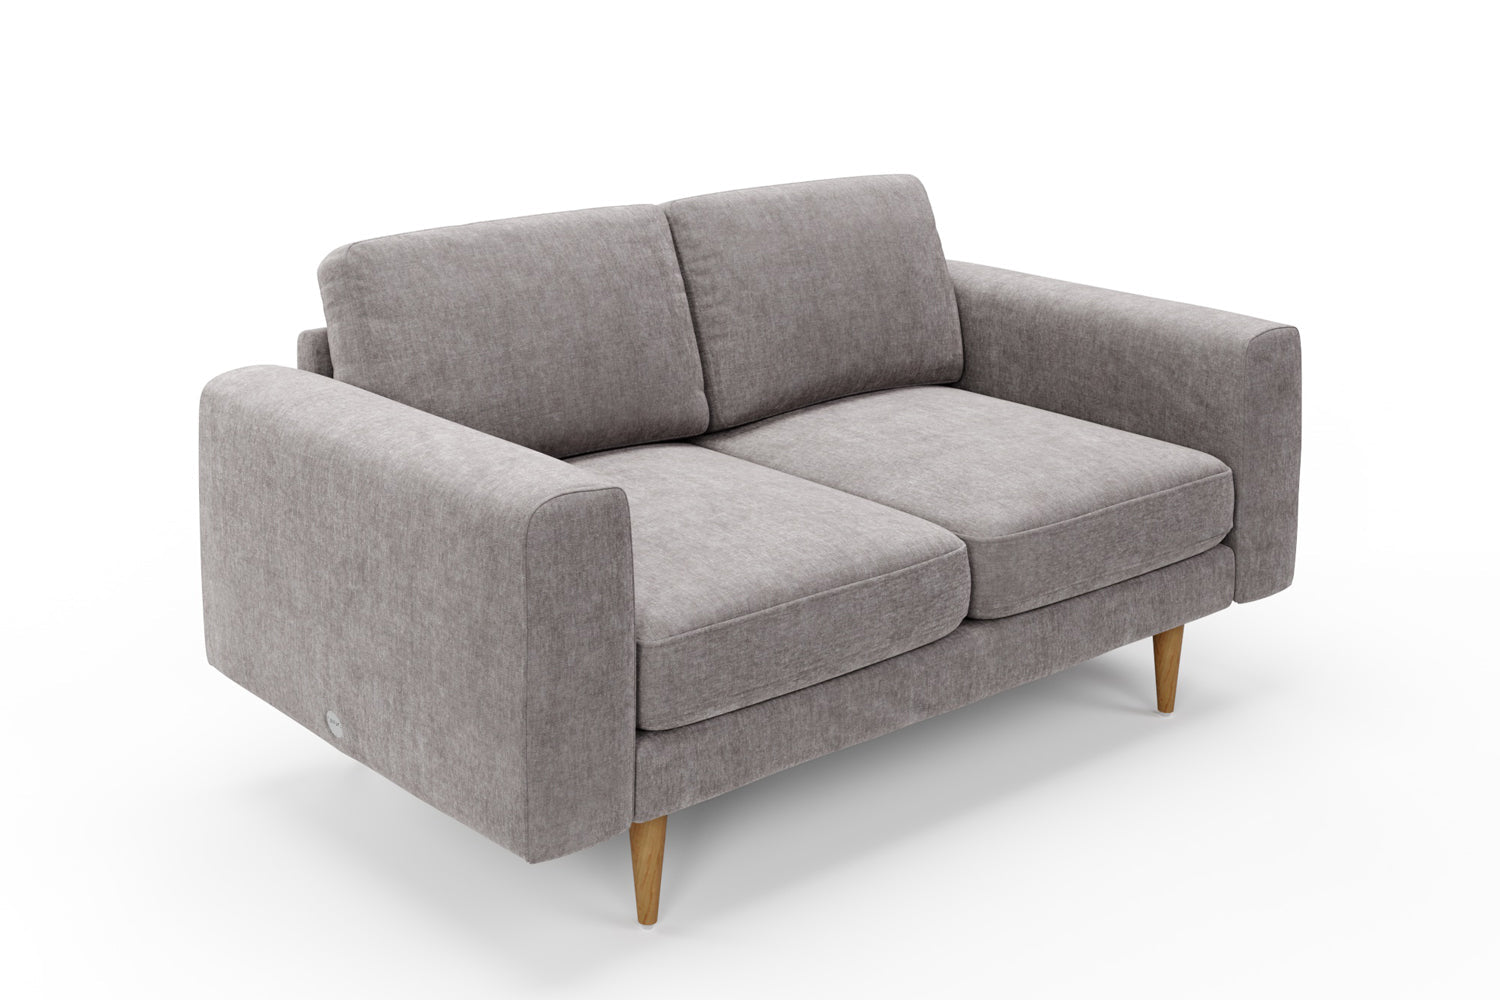 SNUG | The Big Chill 2 Seater Sofa in Mid Grey